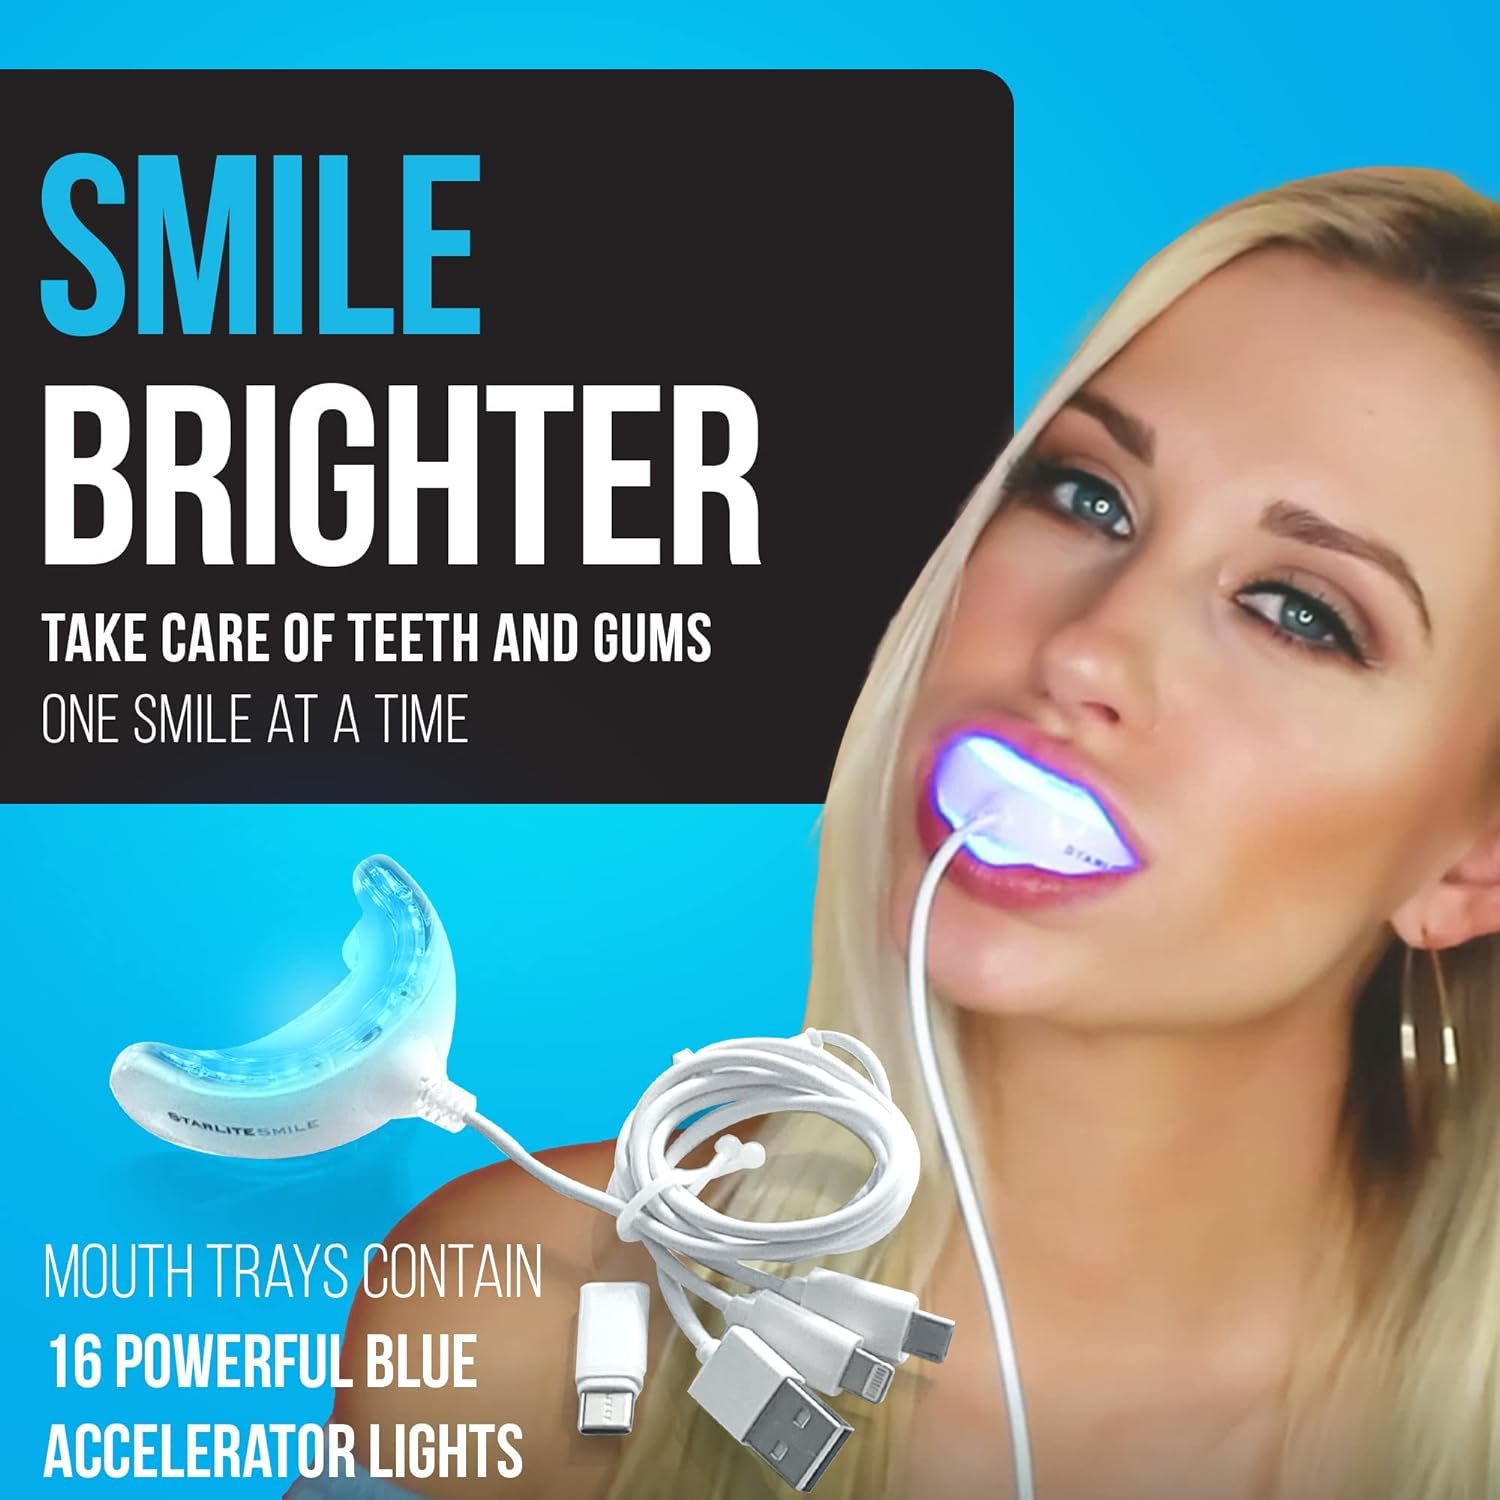 Starlite Smile Teeth Whitening Accelerator Light, 16x Powerful Blue LED Light Mouth Tray, Teeth Whitening Machine for Home Use, Connected with iPhone/Android/USB/USB-C, Teeth Whitener Light Gum Tray